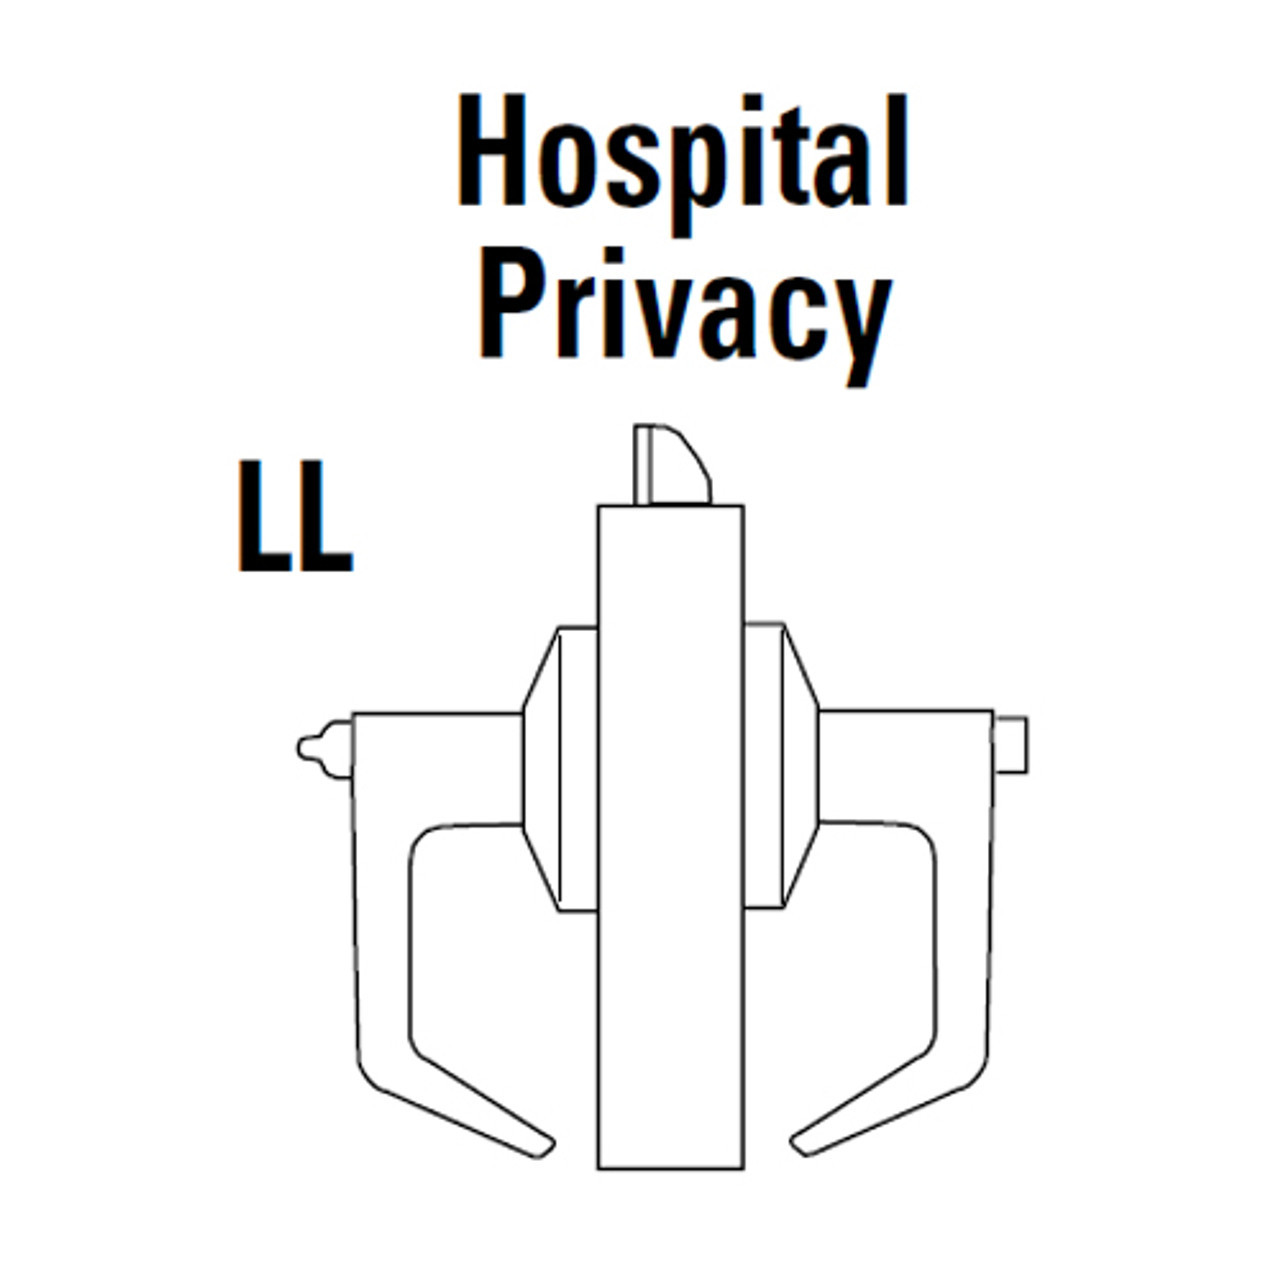 9K30LL15CS3605LM Best 9K Series Hospital Privacy Heavy Duty Cylindrical Lever Locks with Contour Angle with Return Lever Design in Bright Brass